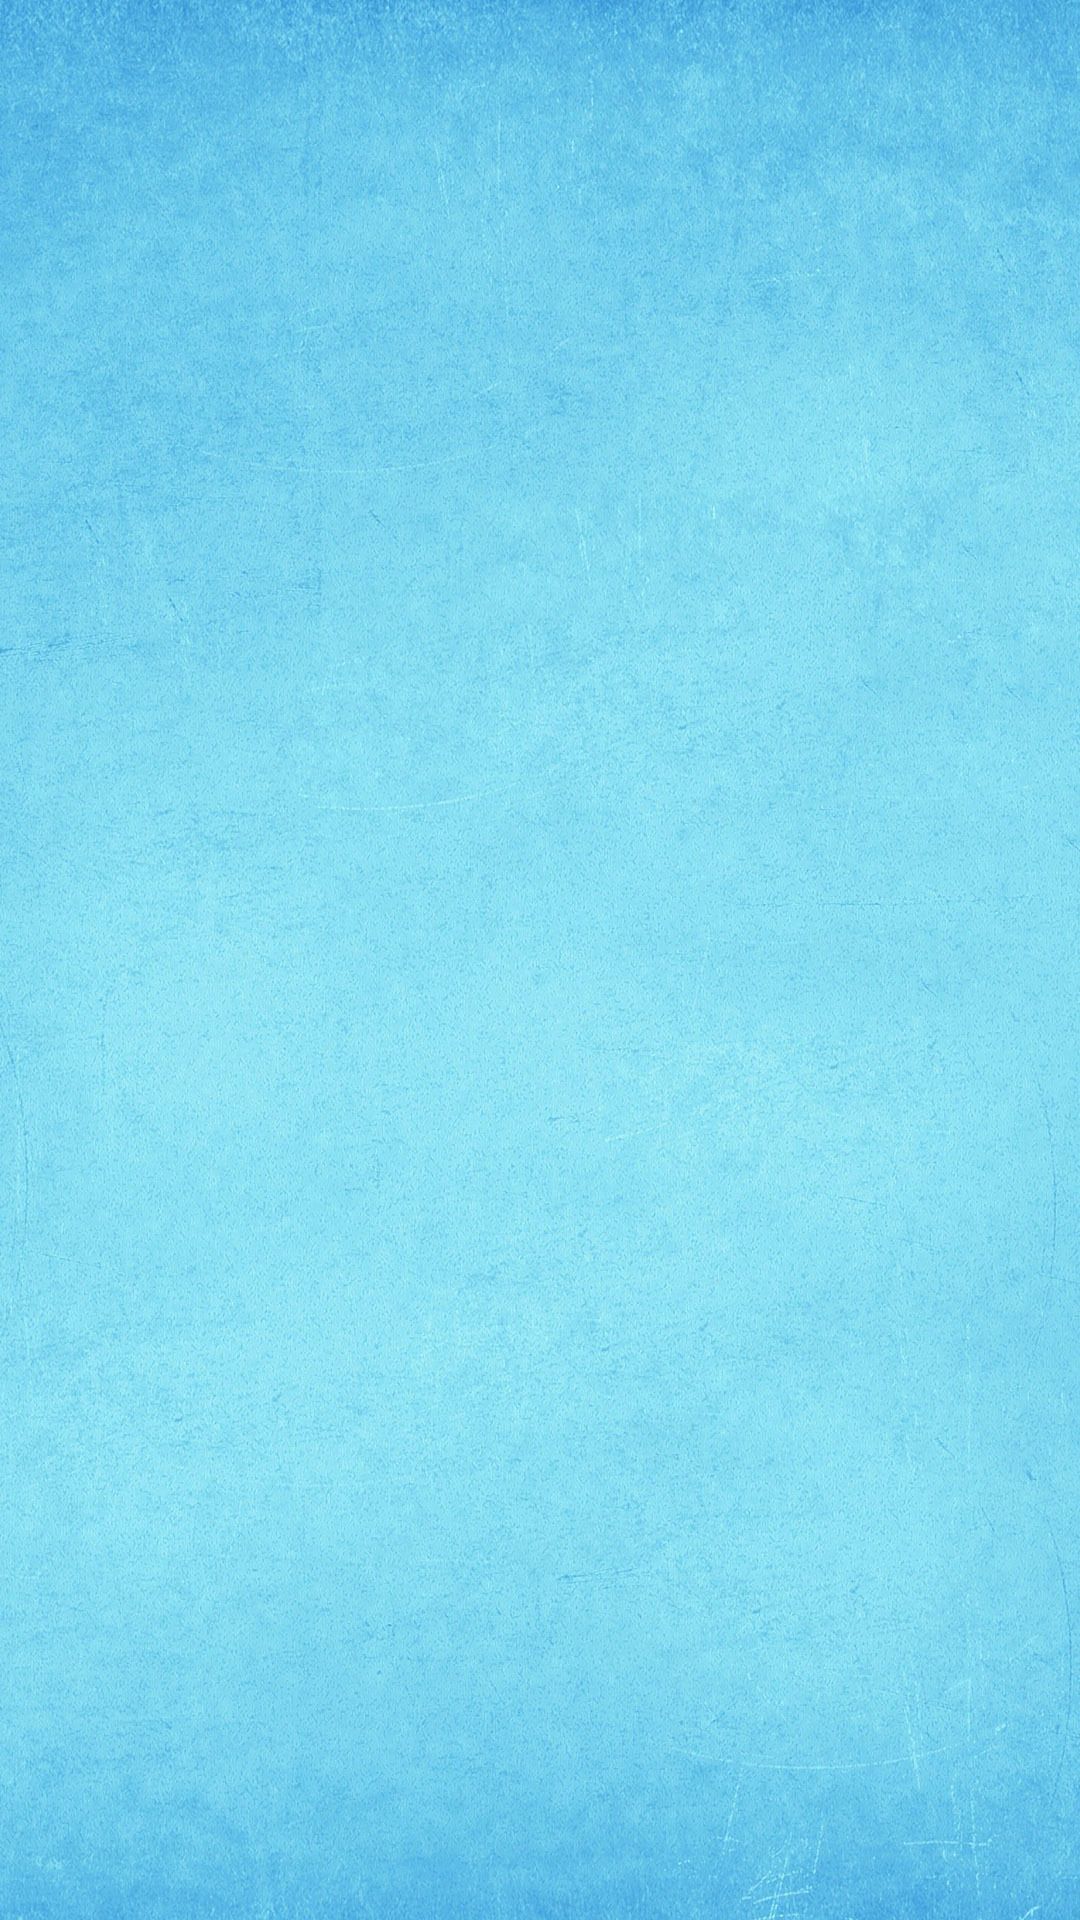 Texture Mobile Backgrounds